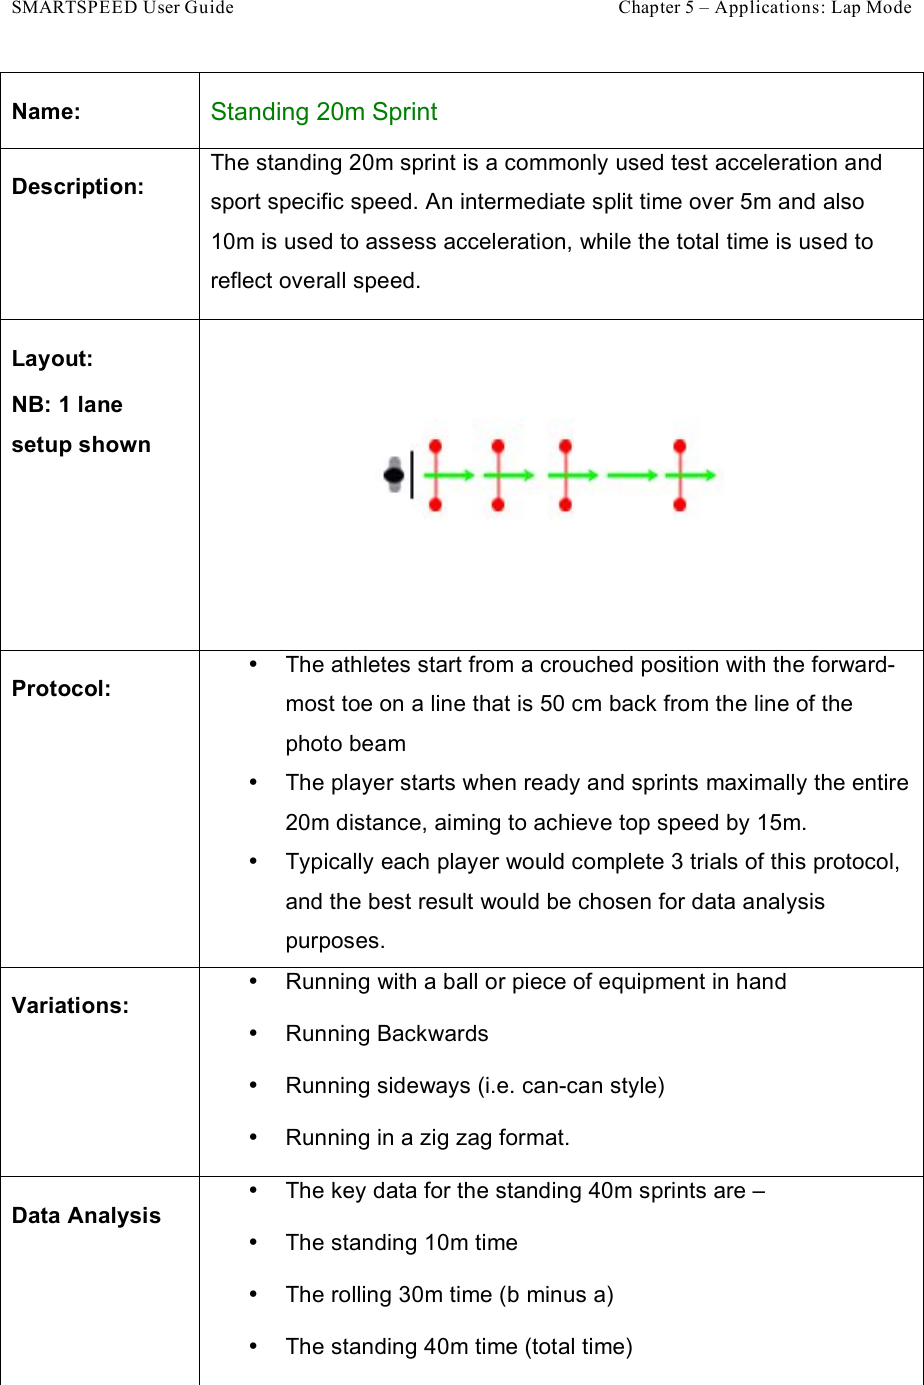 SMARTSPEED User Guide    Chapter 5 – Applications: Lap Mode Name: Standing 20m Sprint Description: The standing 20m sprint is a commonly used test acceleration and sport specific speed. An intermediate split time over 5m and also 10m is used to assess acceleration, while the total time is used to reflect overall speed. Layout: NB: 1 lane setup shown  Protocol: •  The athletes start from a crouched position with the forward-most toe on a line that is 50 cm back from the line of the photo beam  •  The player starts when ready and sprints maximally the entire 20m distance, aiming to achieve top speed by 15m.  •  Typically each player would complete 3 trials of this protocol, and the best result would be chosen for data analysis purposes. Variations: •  Running with a ball or piece of equipment in hand •  Running Backwards •  Running sideways (i.e. can-can style) •  Running in a zig zag format. Data Analysis •  The key data for the standing 40m sprints are –  •  The standing 10m time •  The rolling 30m time (b minus a) •  The standing 40m time (total time) 